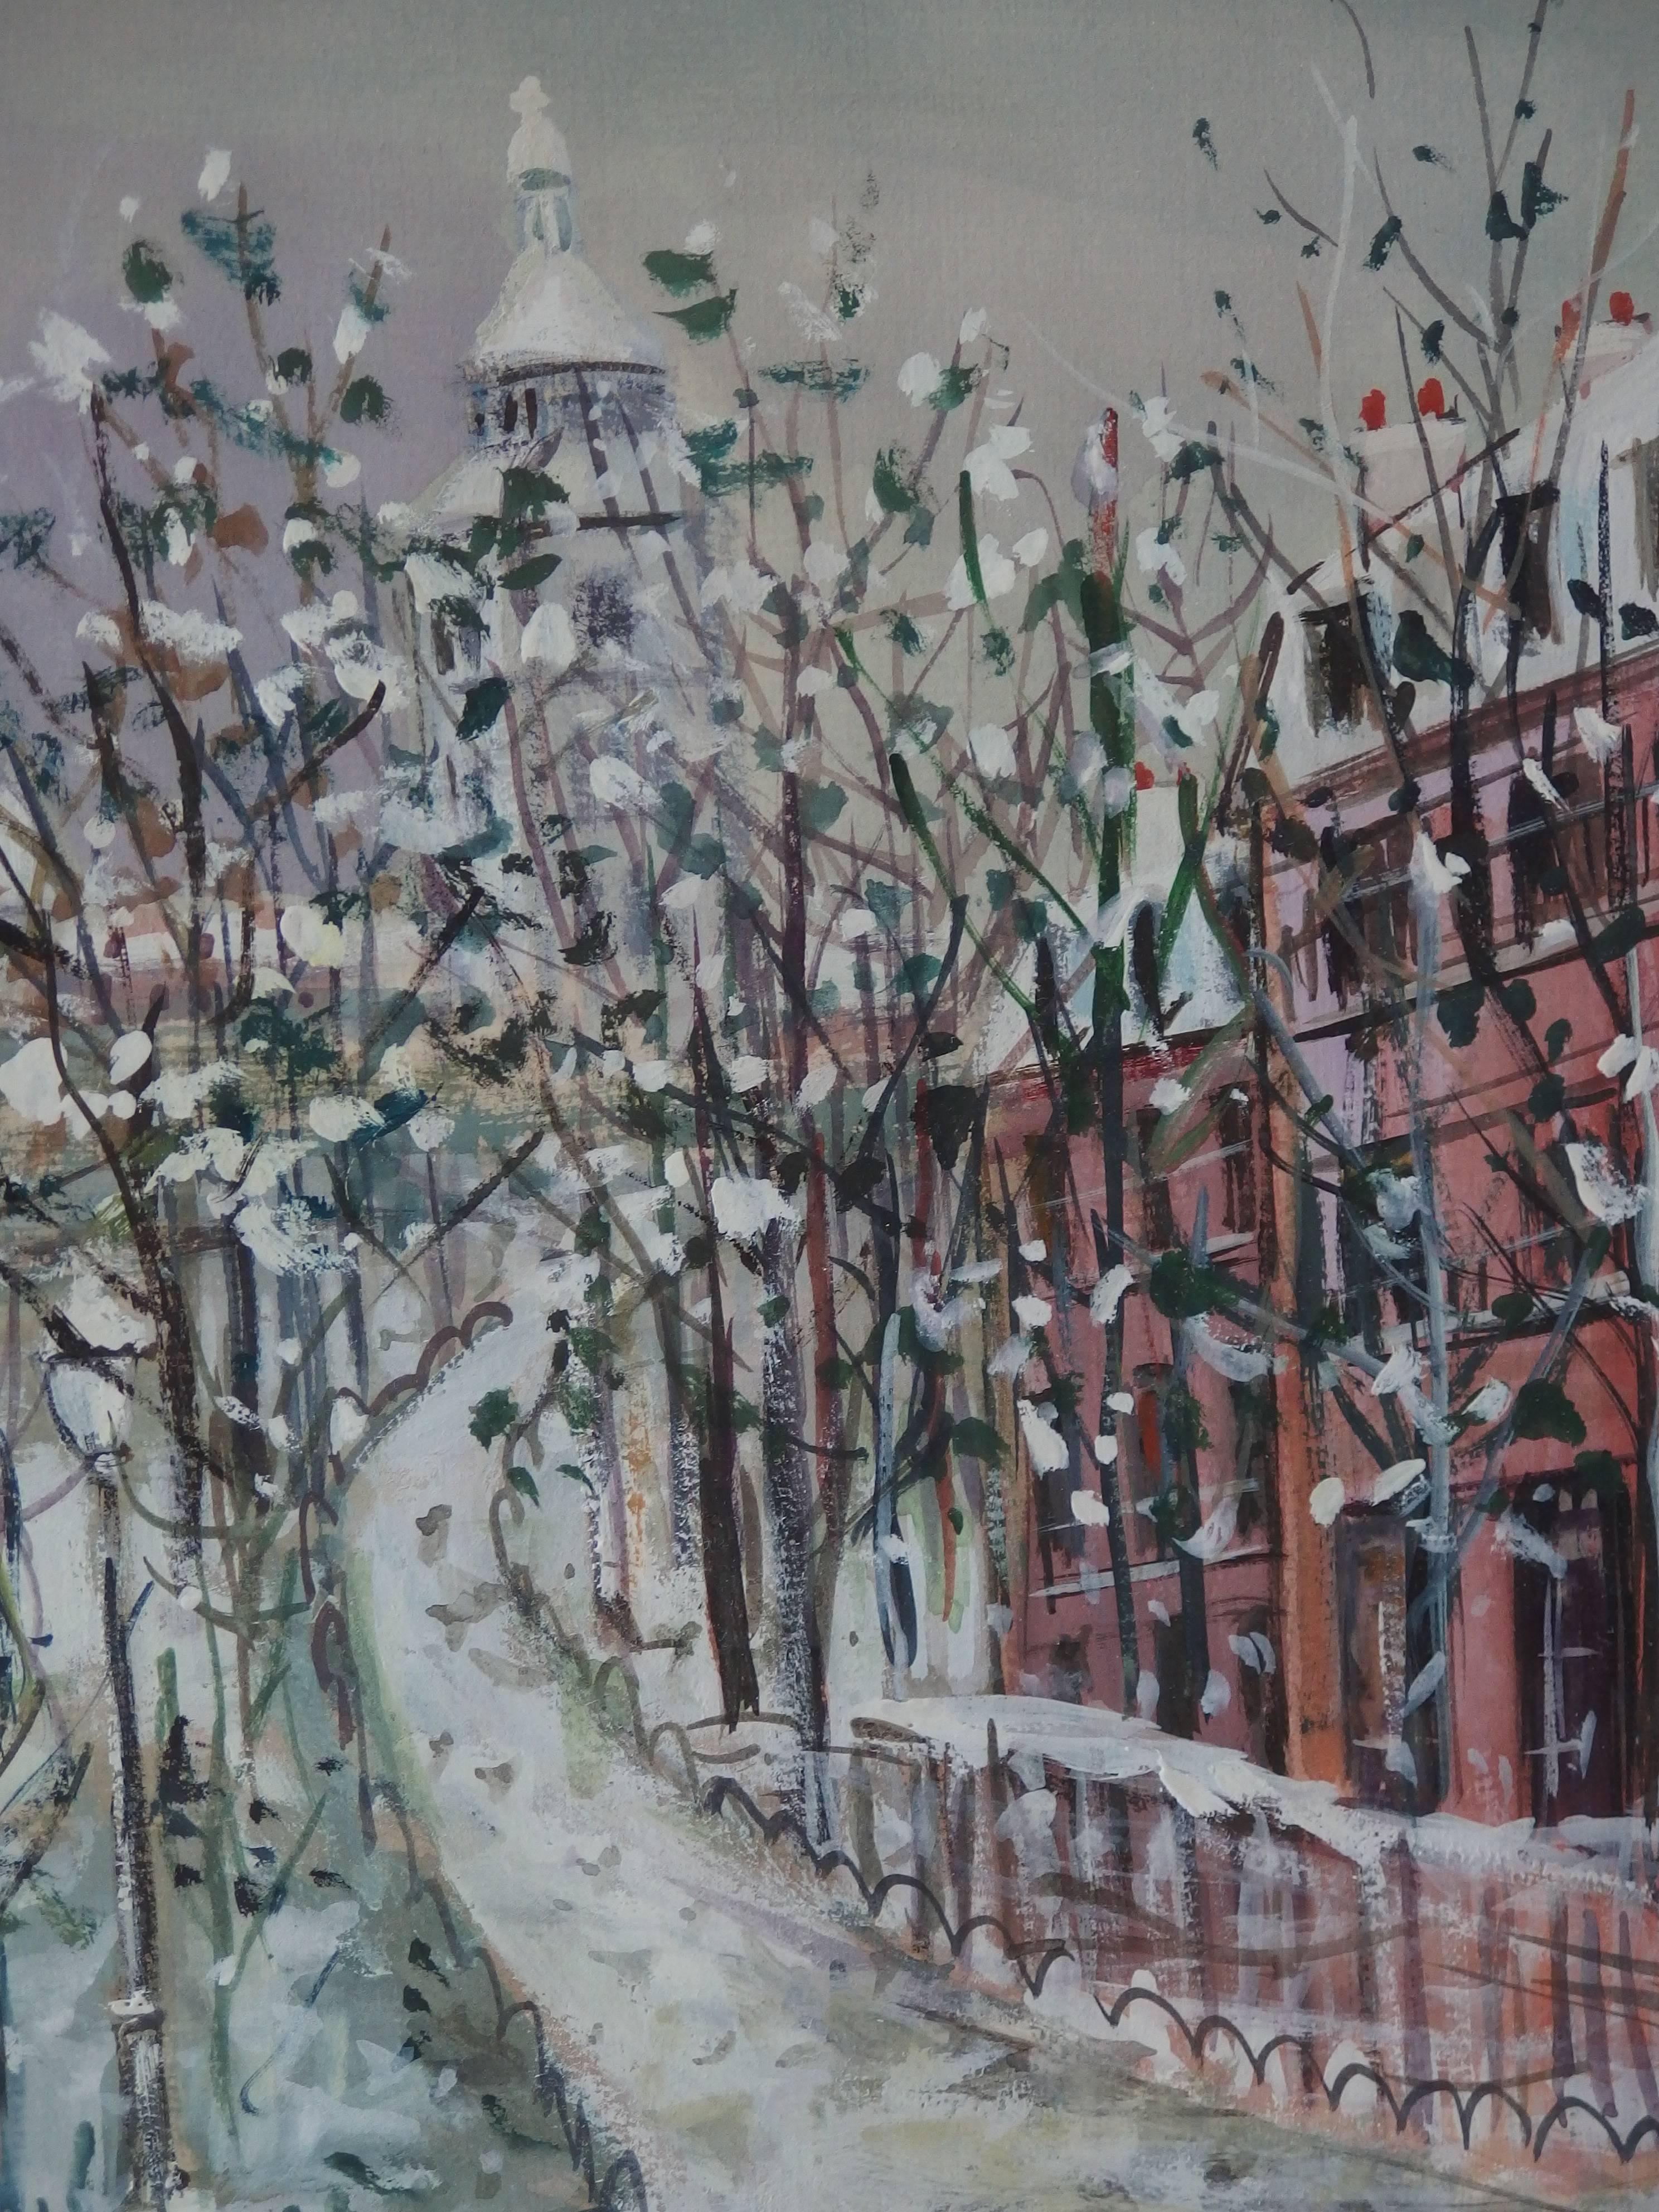 Maurice UTRILLO
Square Saint Pierre à Montmartre sous la Neige (Saint Pierre Square in Montmartre Under The Snow)

Original gouache painting
Signed bottom right
Situated 